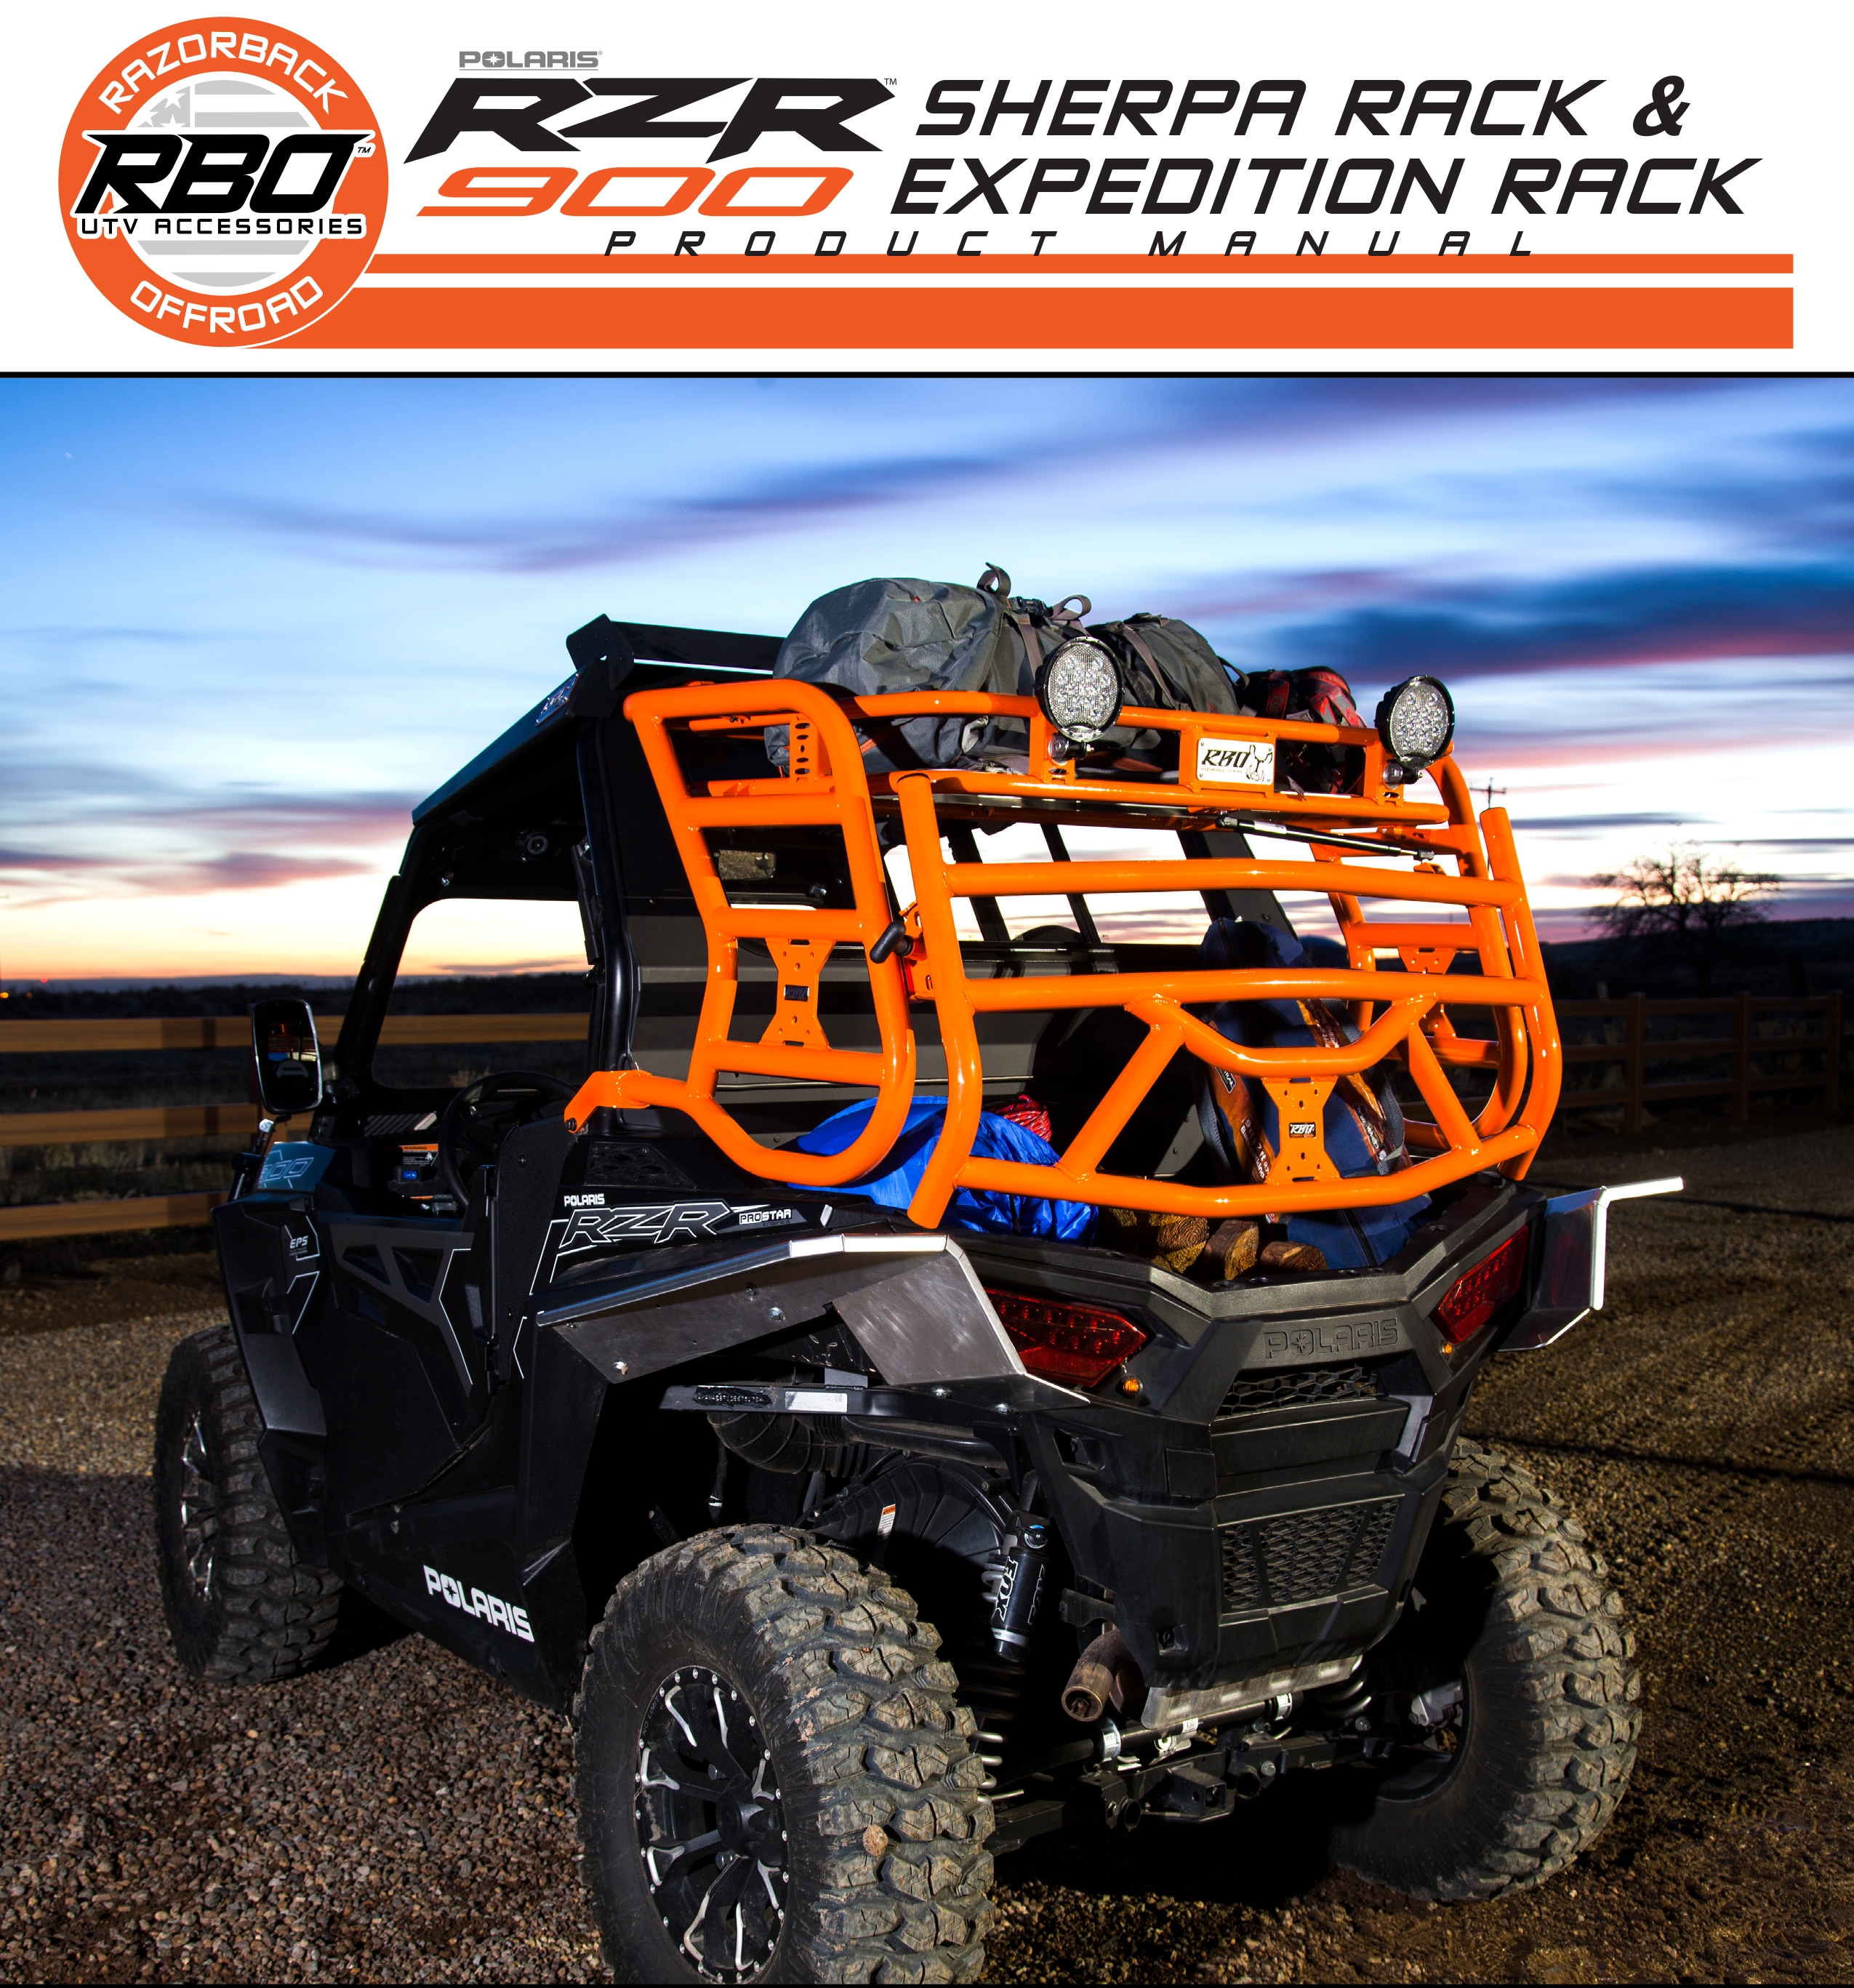 RBO RZR 900 Sherpa and Expedition Rack Product Manual